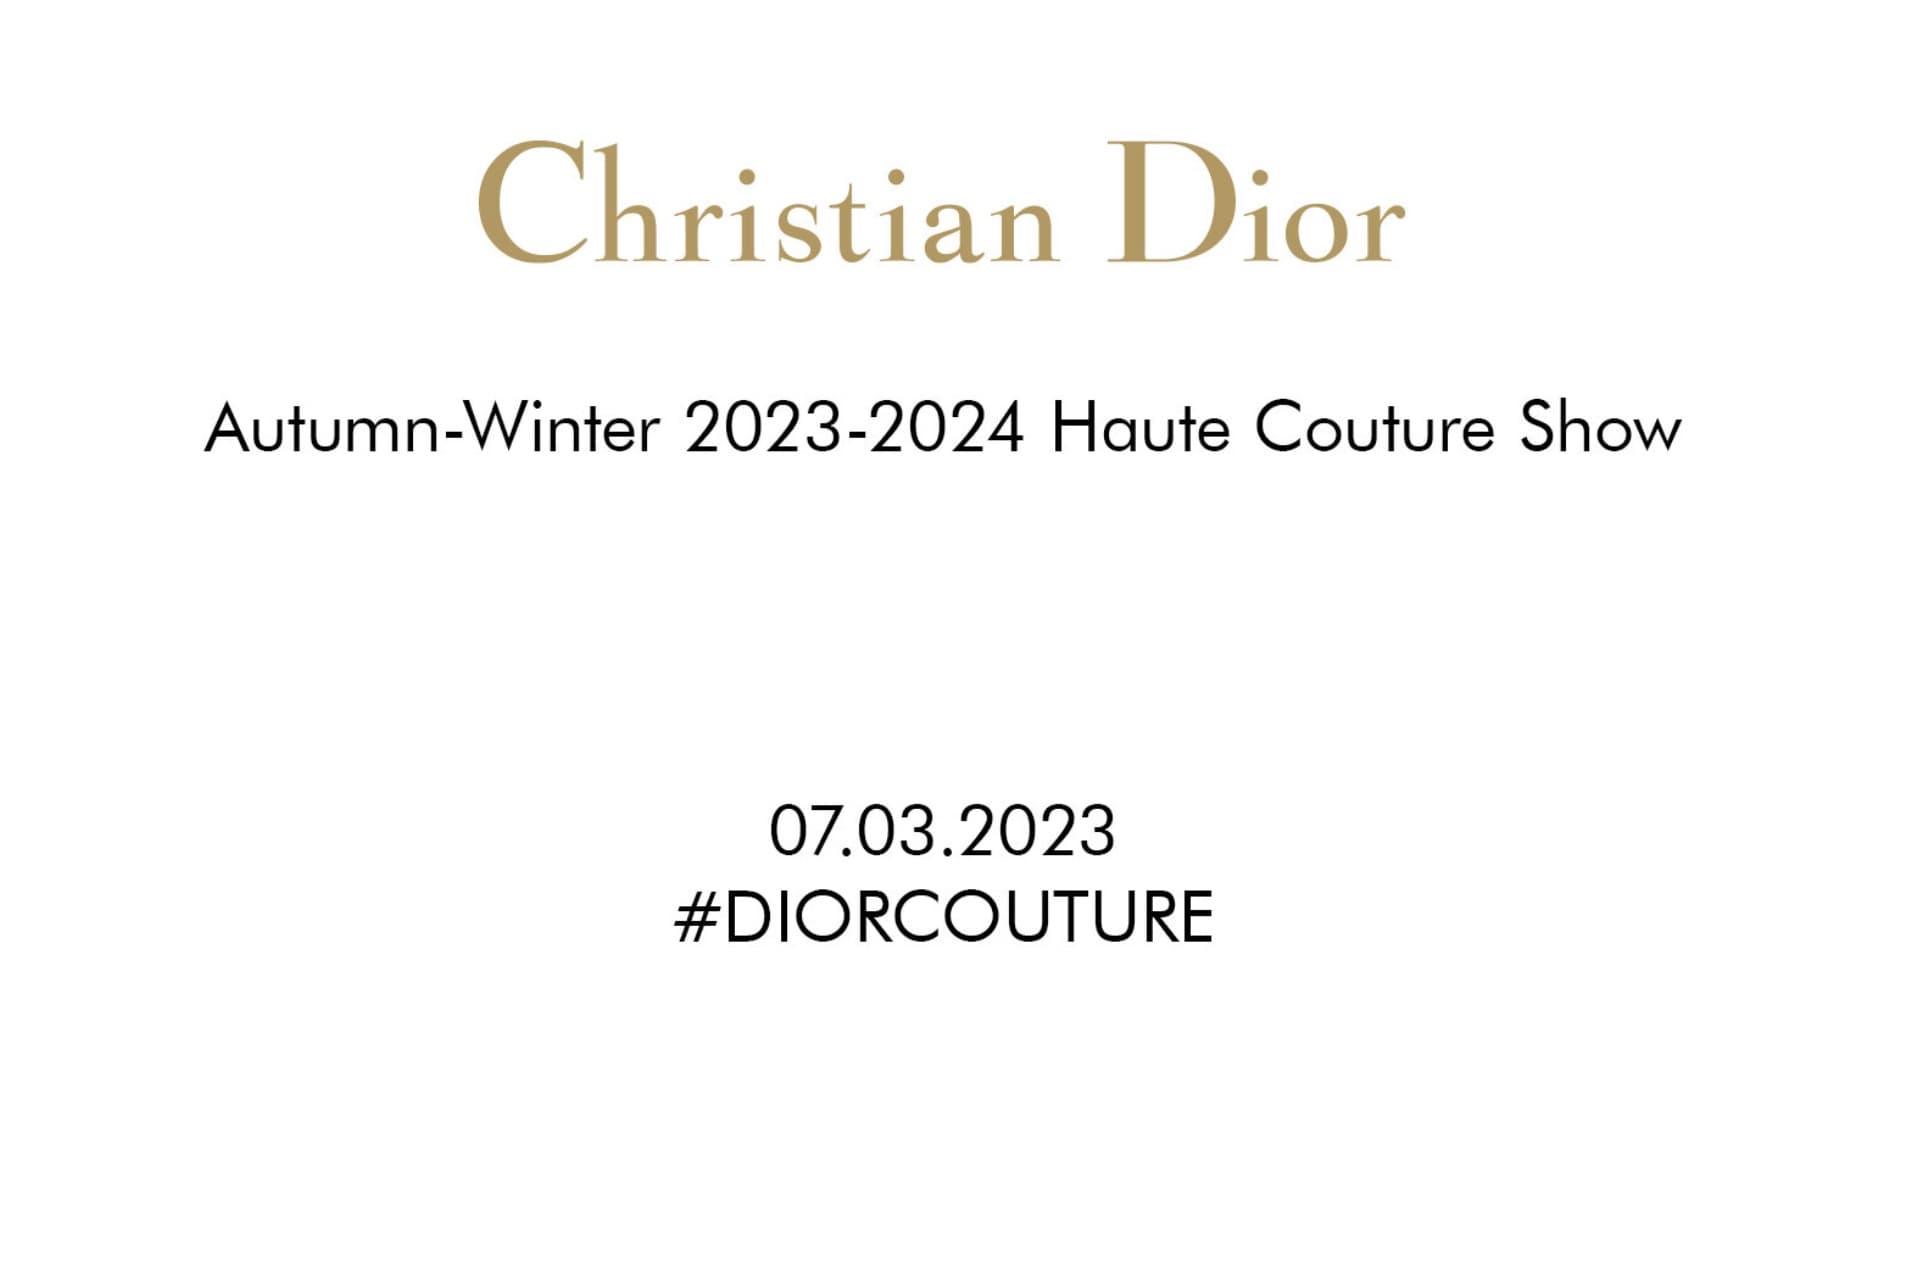 Watch the Dior fall/winter 2023 show live